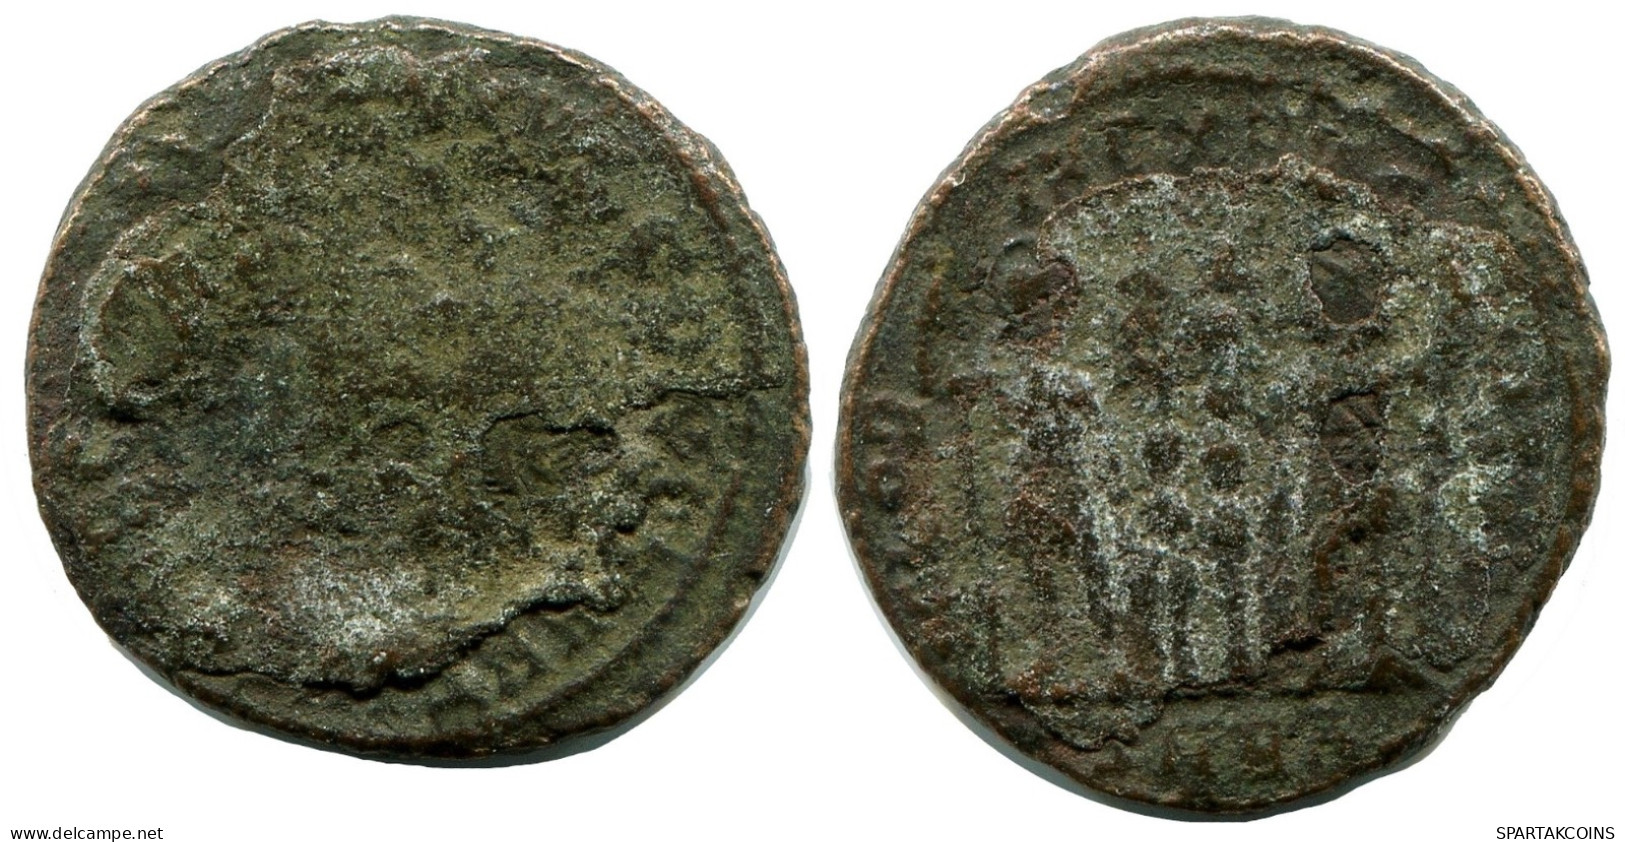 CONSTANTINE I MINTED IN HERACLEA FROM THE ROYAL ONTARIO MUSEUM #ANC11207.14.U.A - Der Christlischen Kaiser (307 / 363)